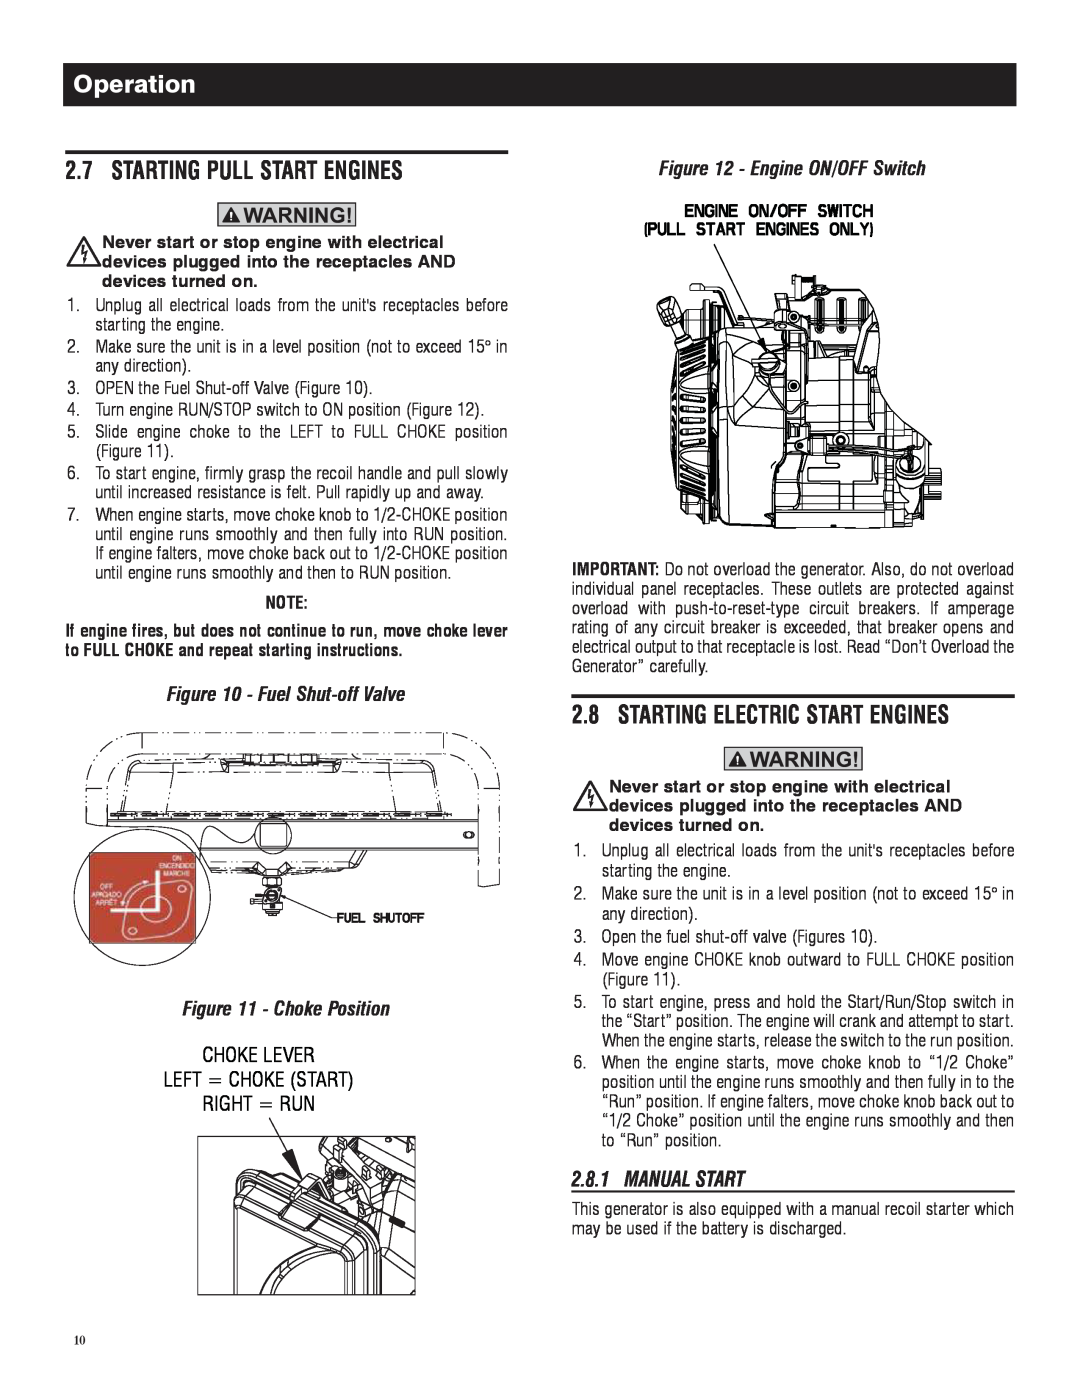 Honeywell 6039 owner manual Engine ON/OFF Switch, Fuel Shut-off Valve - Choke Position, Operation 